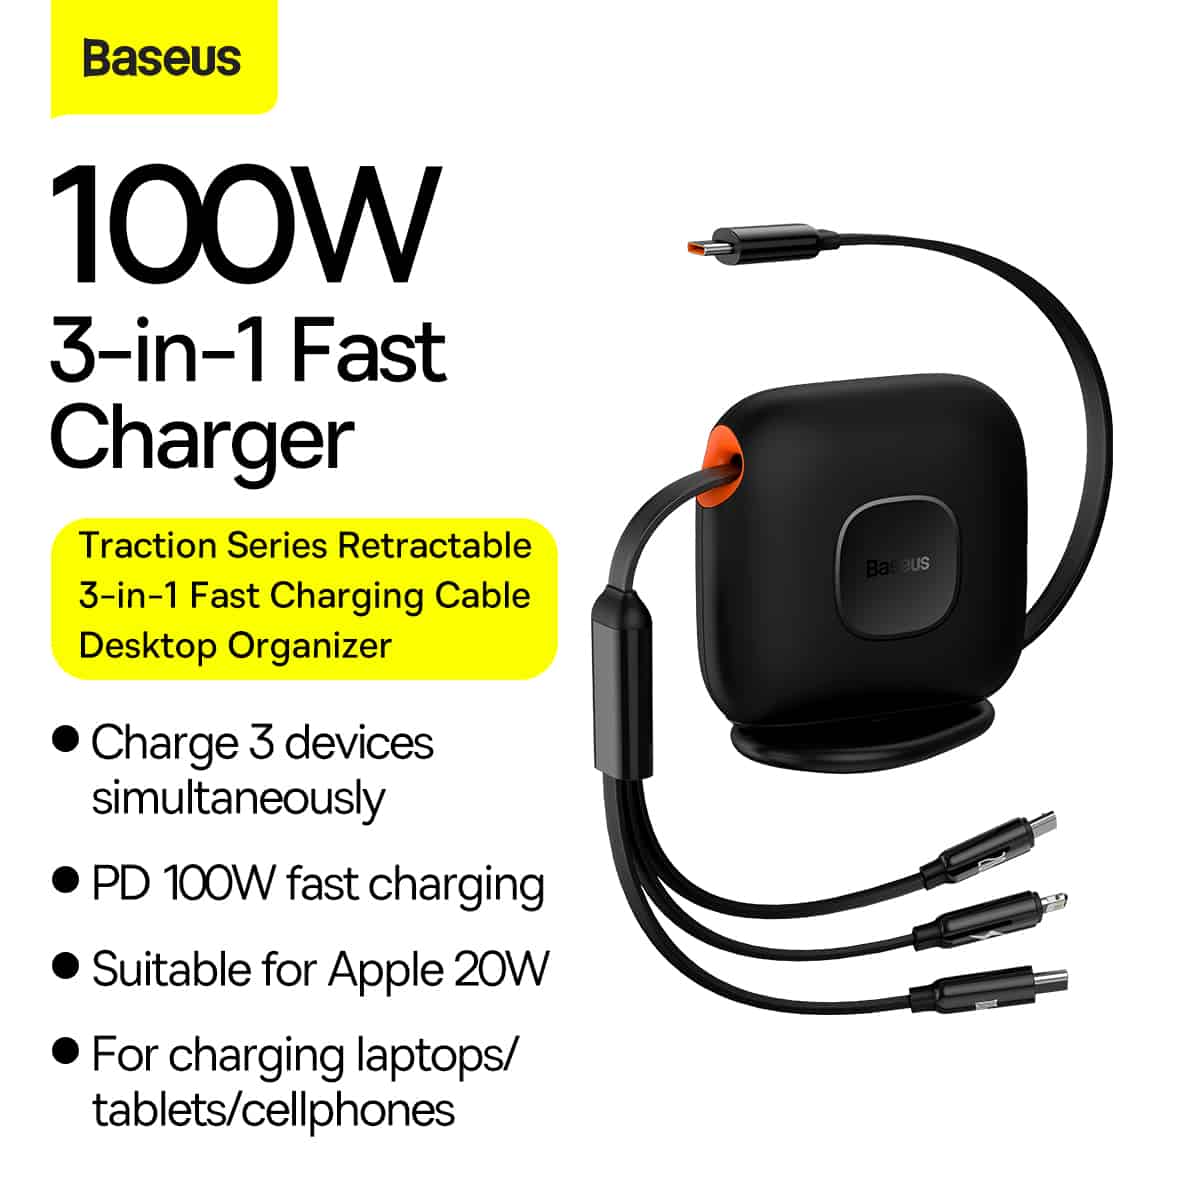 Baseus Traction Series Retractable 3 in 1 Fast Charging Cable 100W Type C to MLC 4